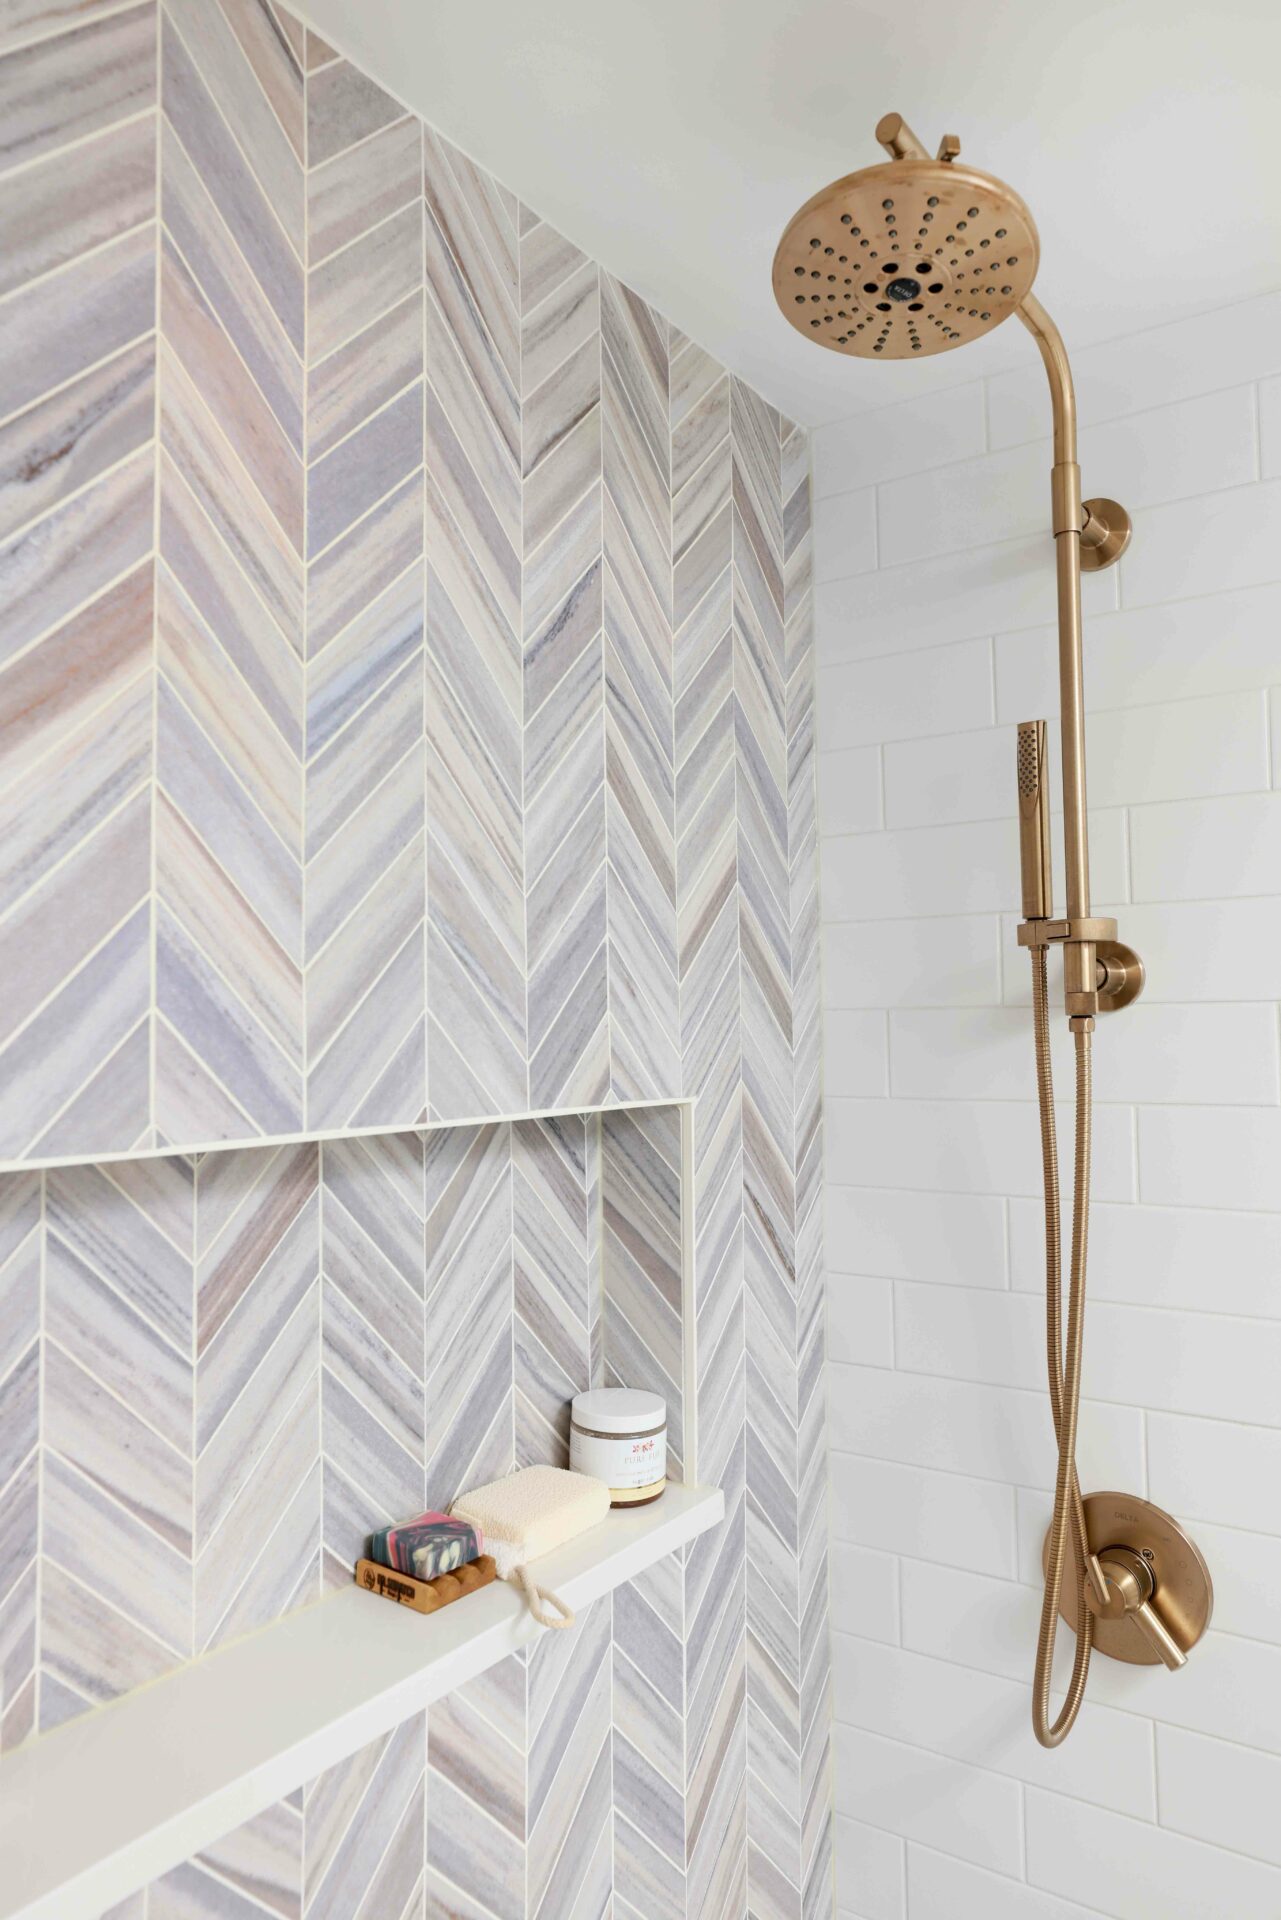 Chevron tile in shower with niche and gold shower fixture